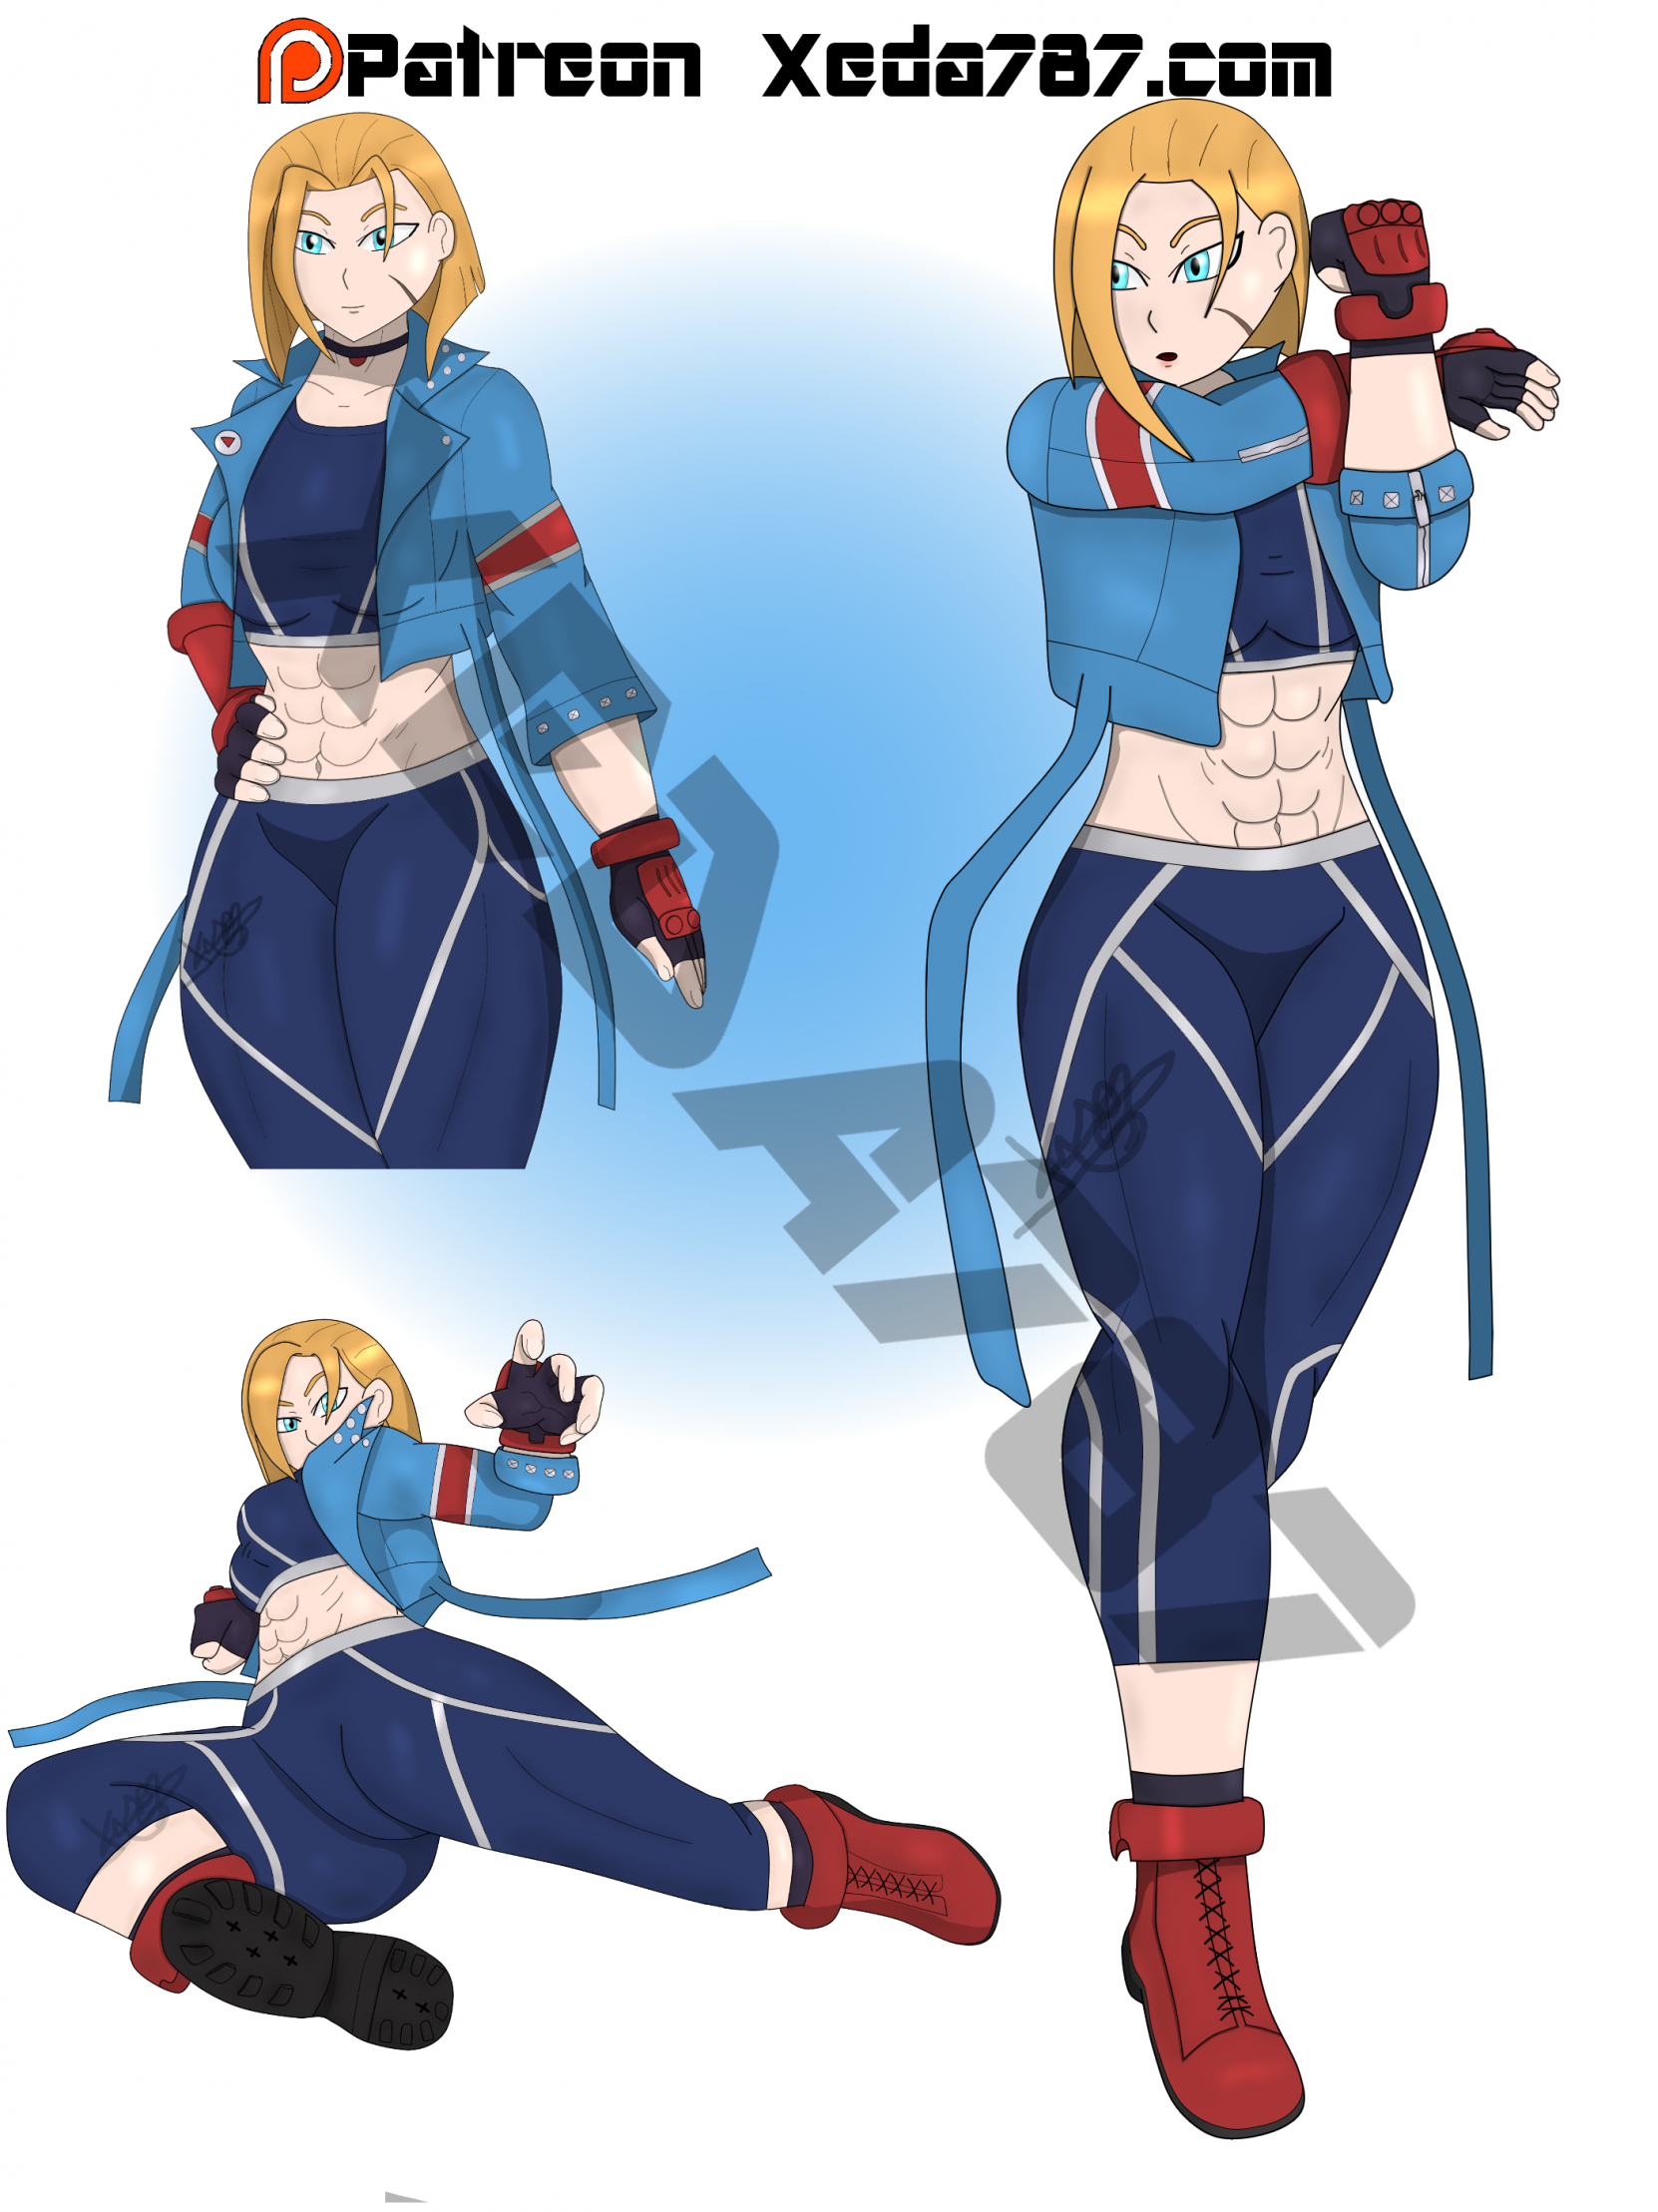 Cammy White Street Fighter Fanart by Magnaomega -- Fur Affinity